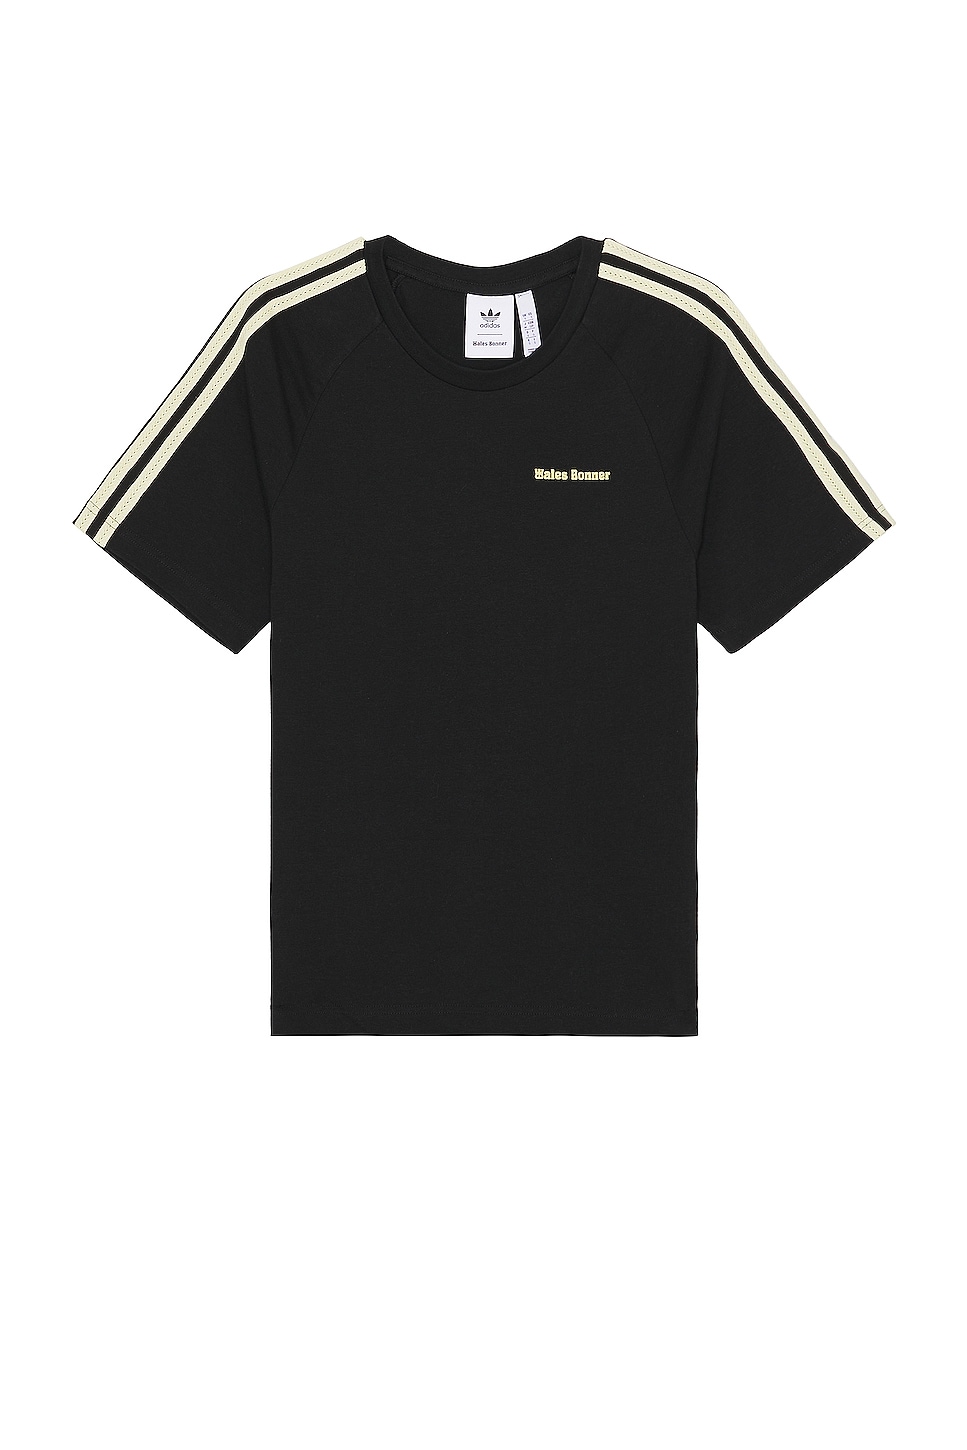 Image 1 of adidas by Wales Bonner T-shirt in Black